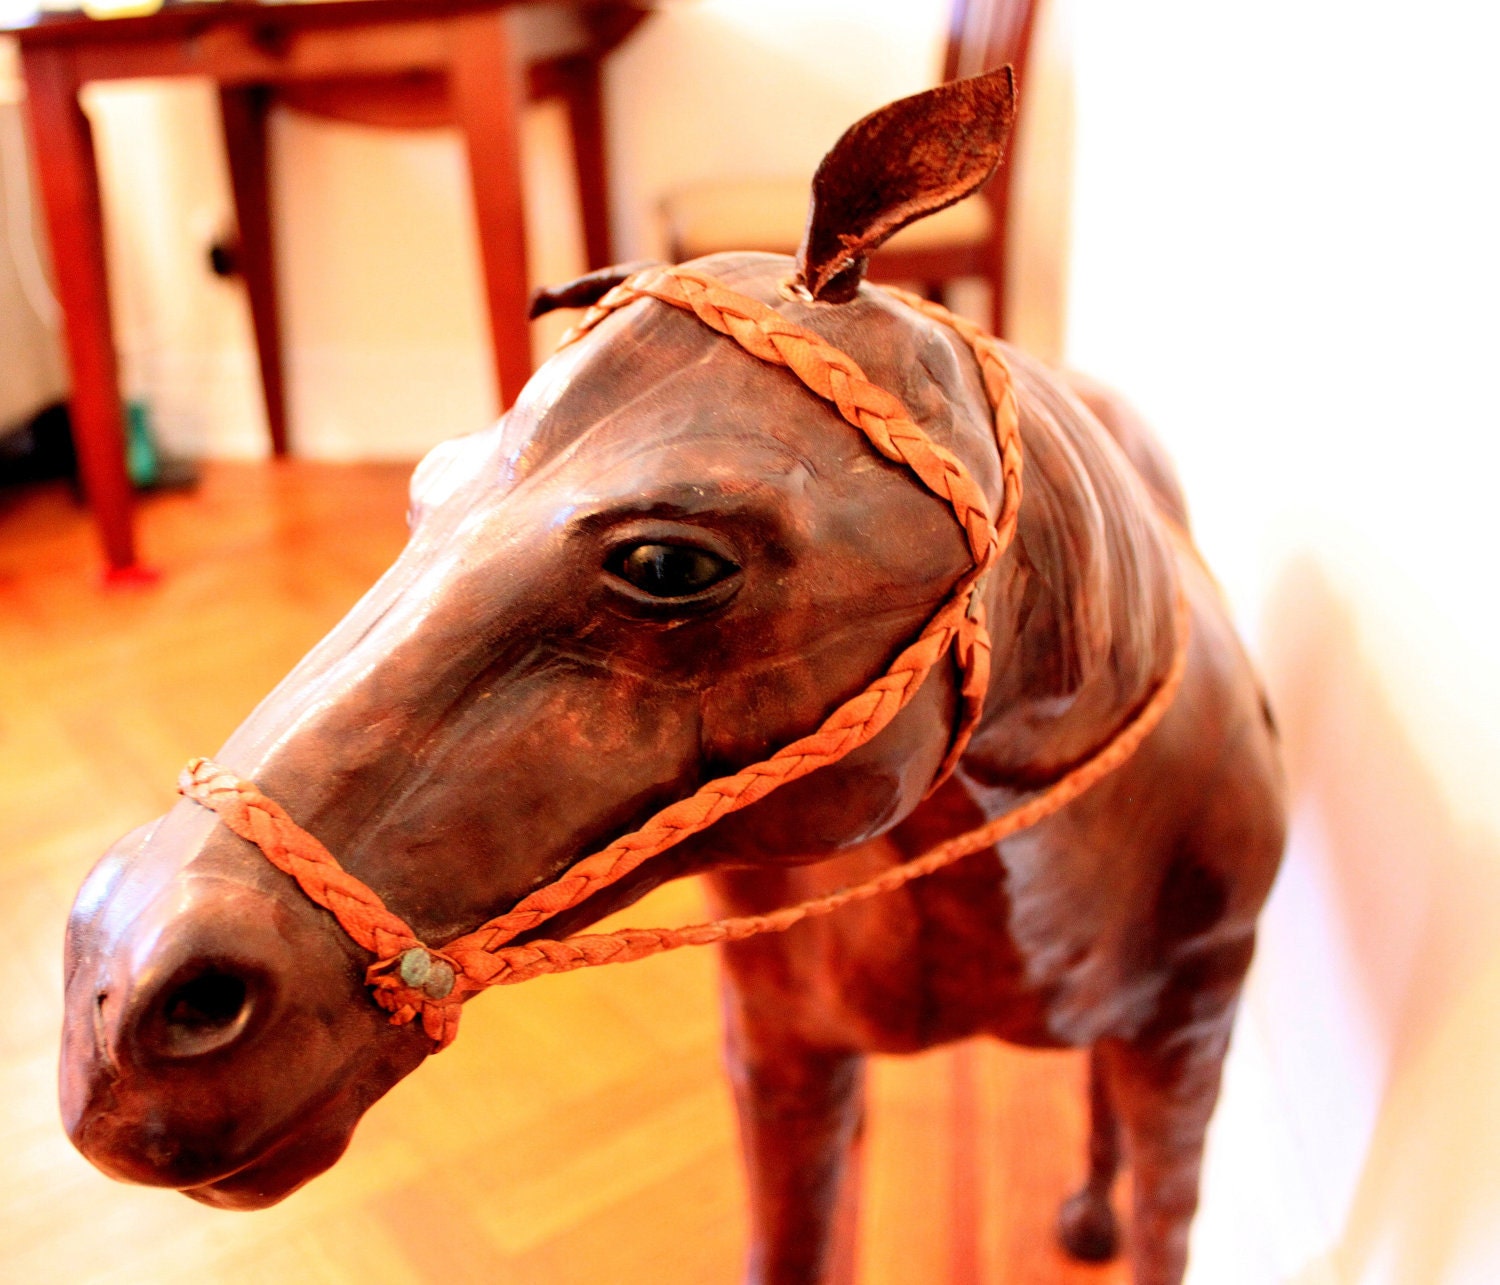 British Equestrian Leather Horse Sculpture by Fivehands